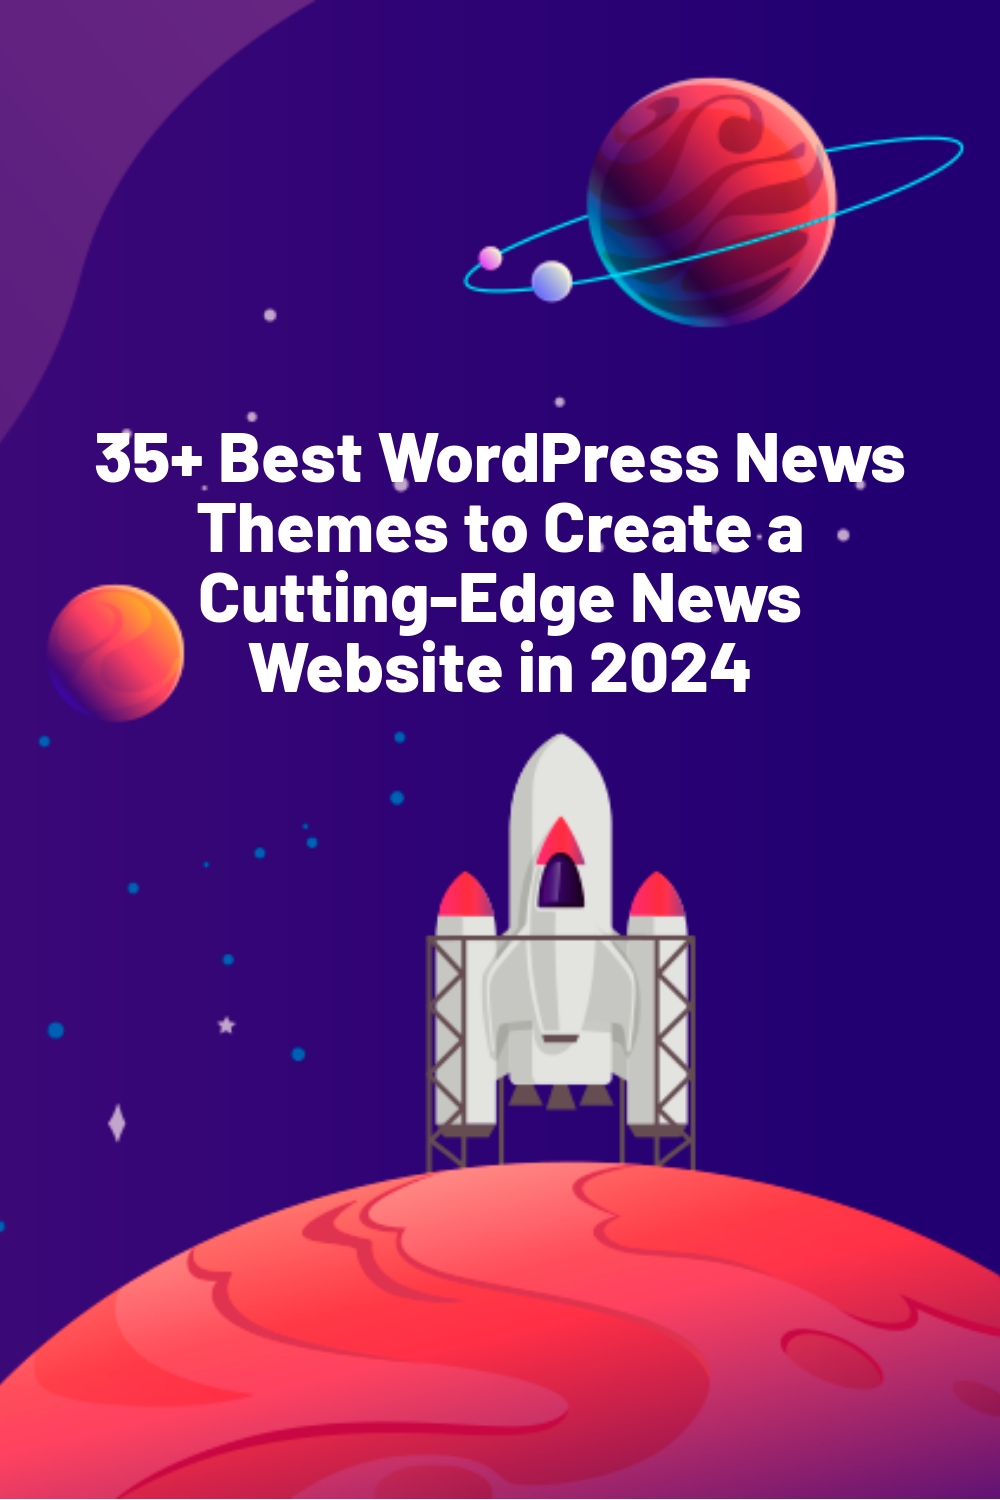 35+ Best WordPress News Themes to Create a Cutting-Edge News Website in 2024